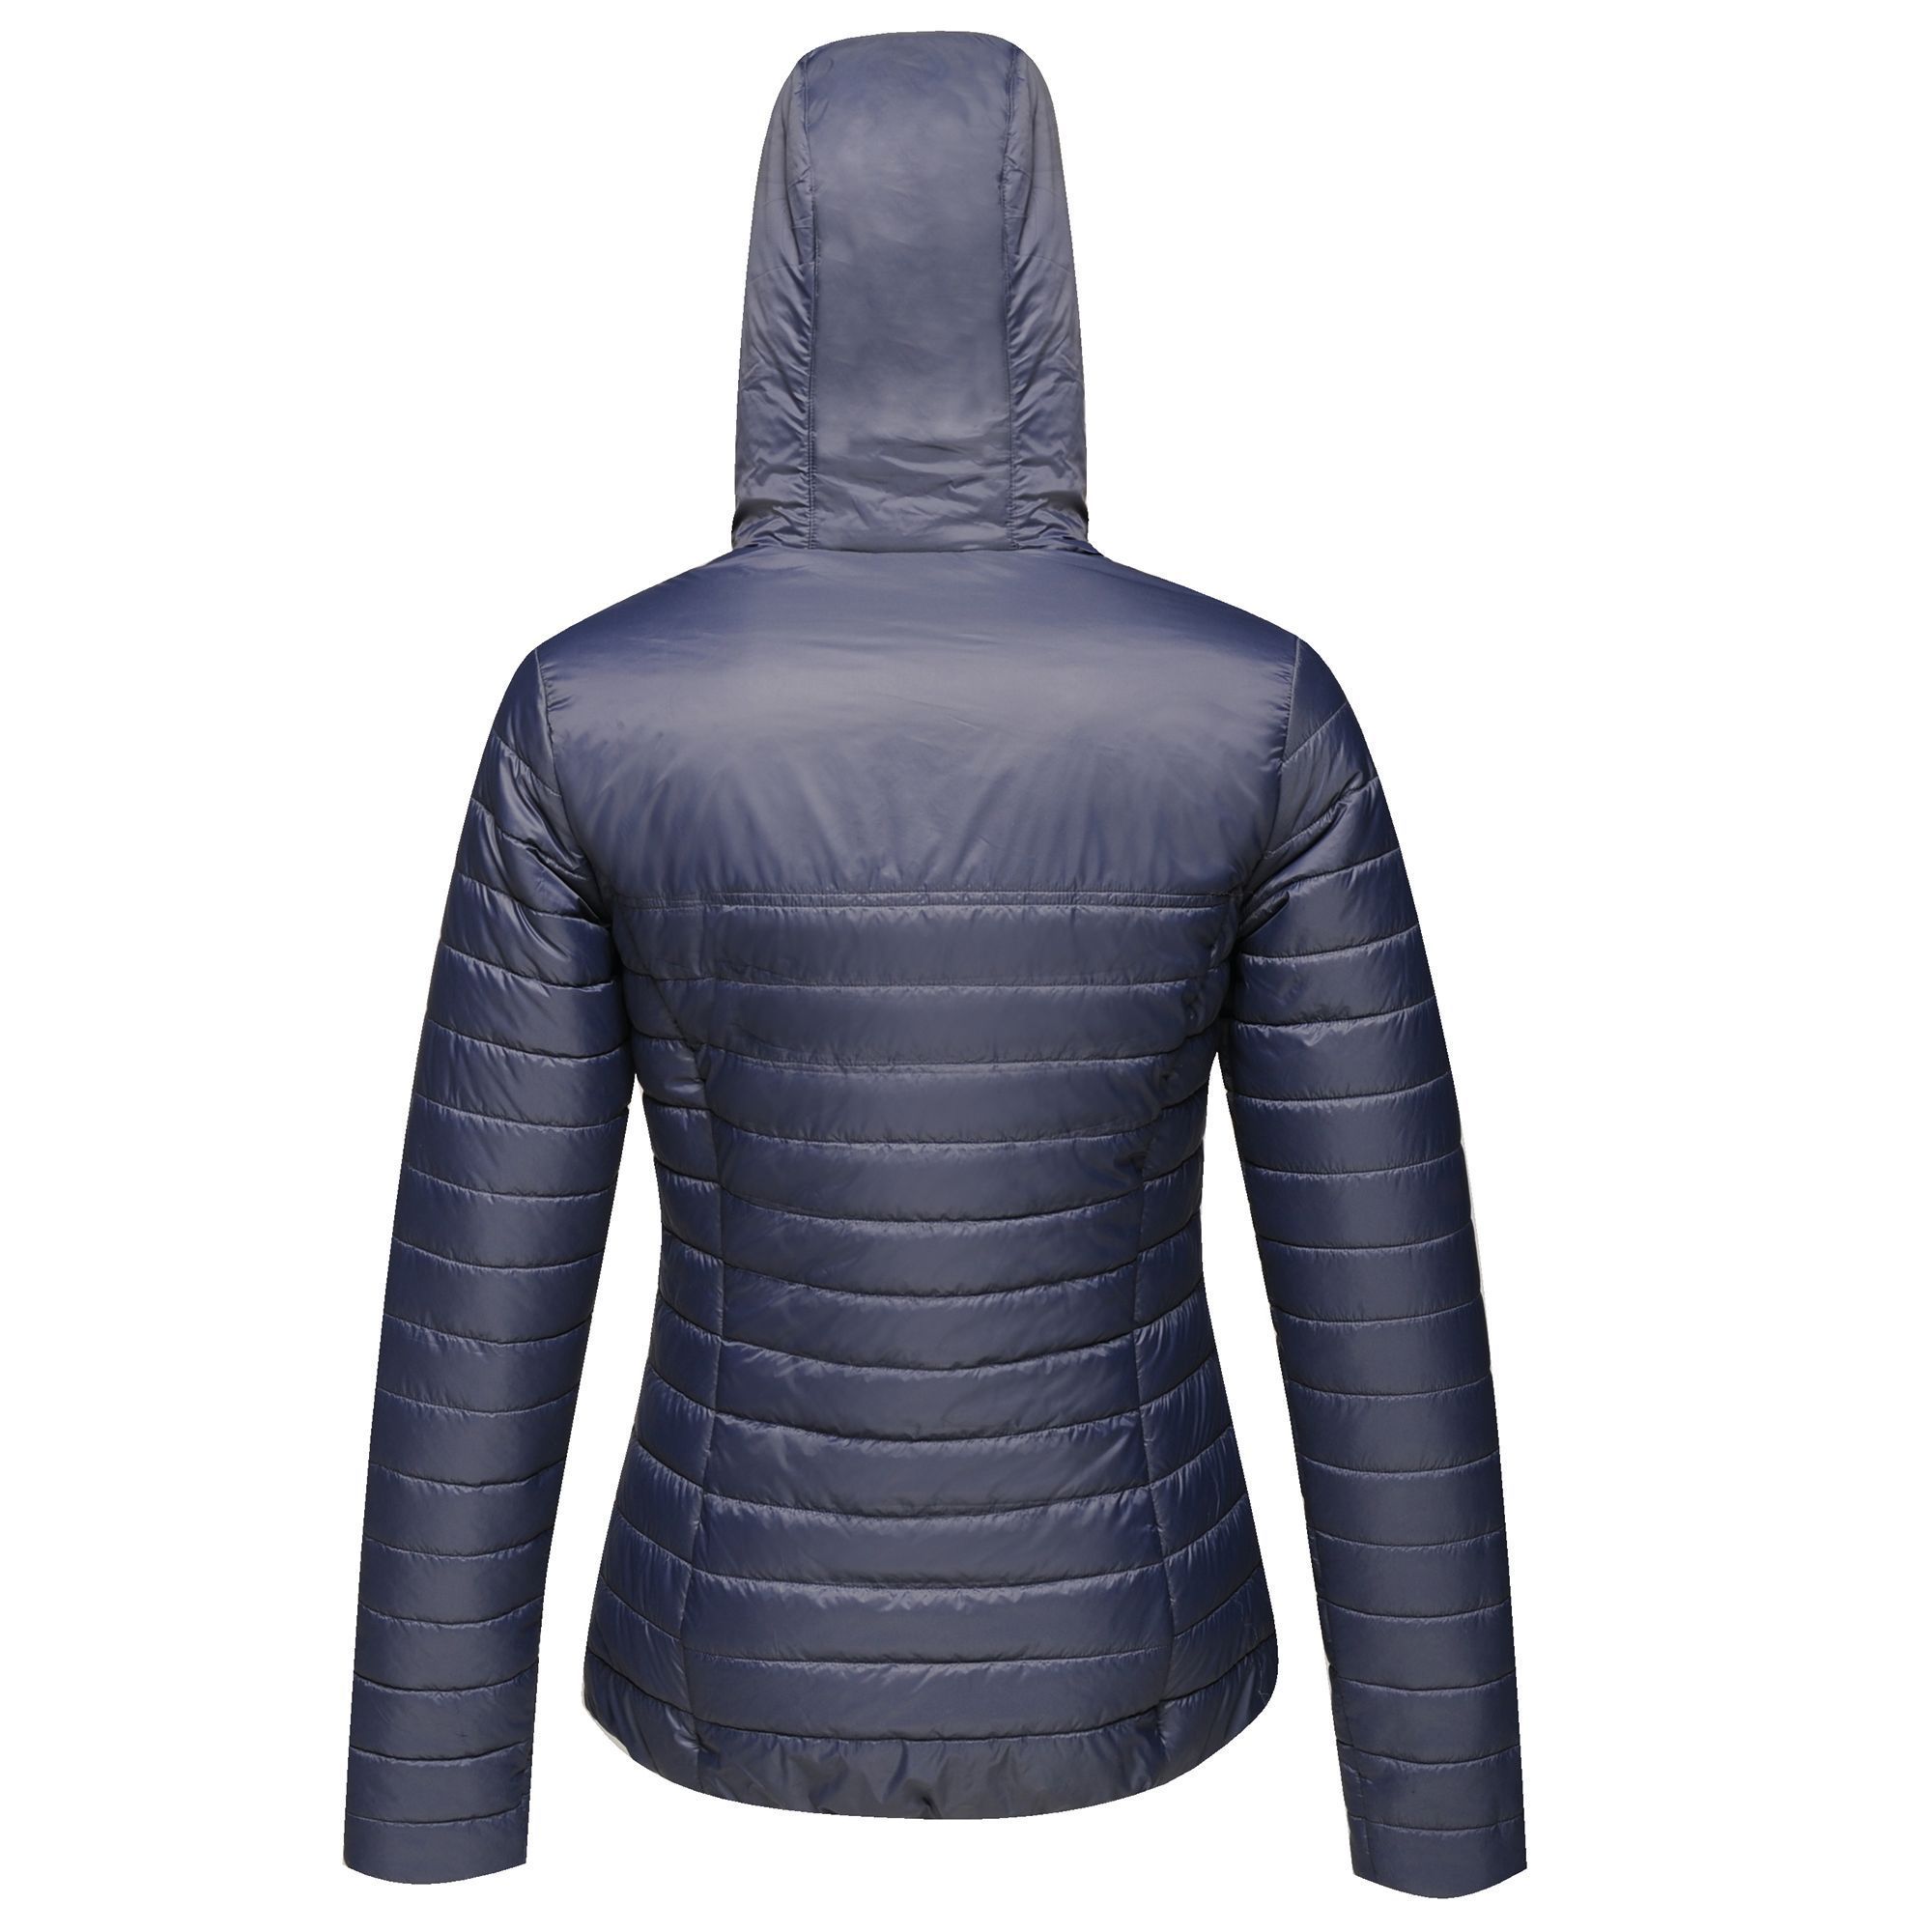 100% Polyamide with water repellent and cire finish. 140 GSM body insulation wadding weight. Polyester taffeta lining. Grown on insulated hood. Stretch binding to hood opening, cuffs and hem. 2 zipped lower pockets. Easily compressible.